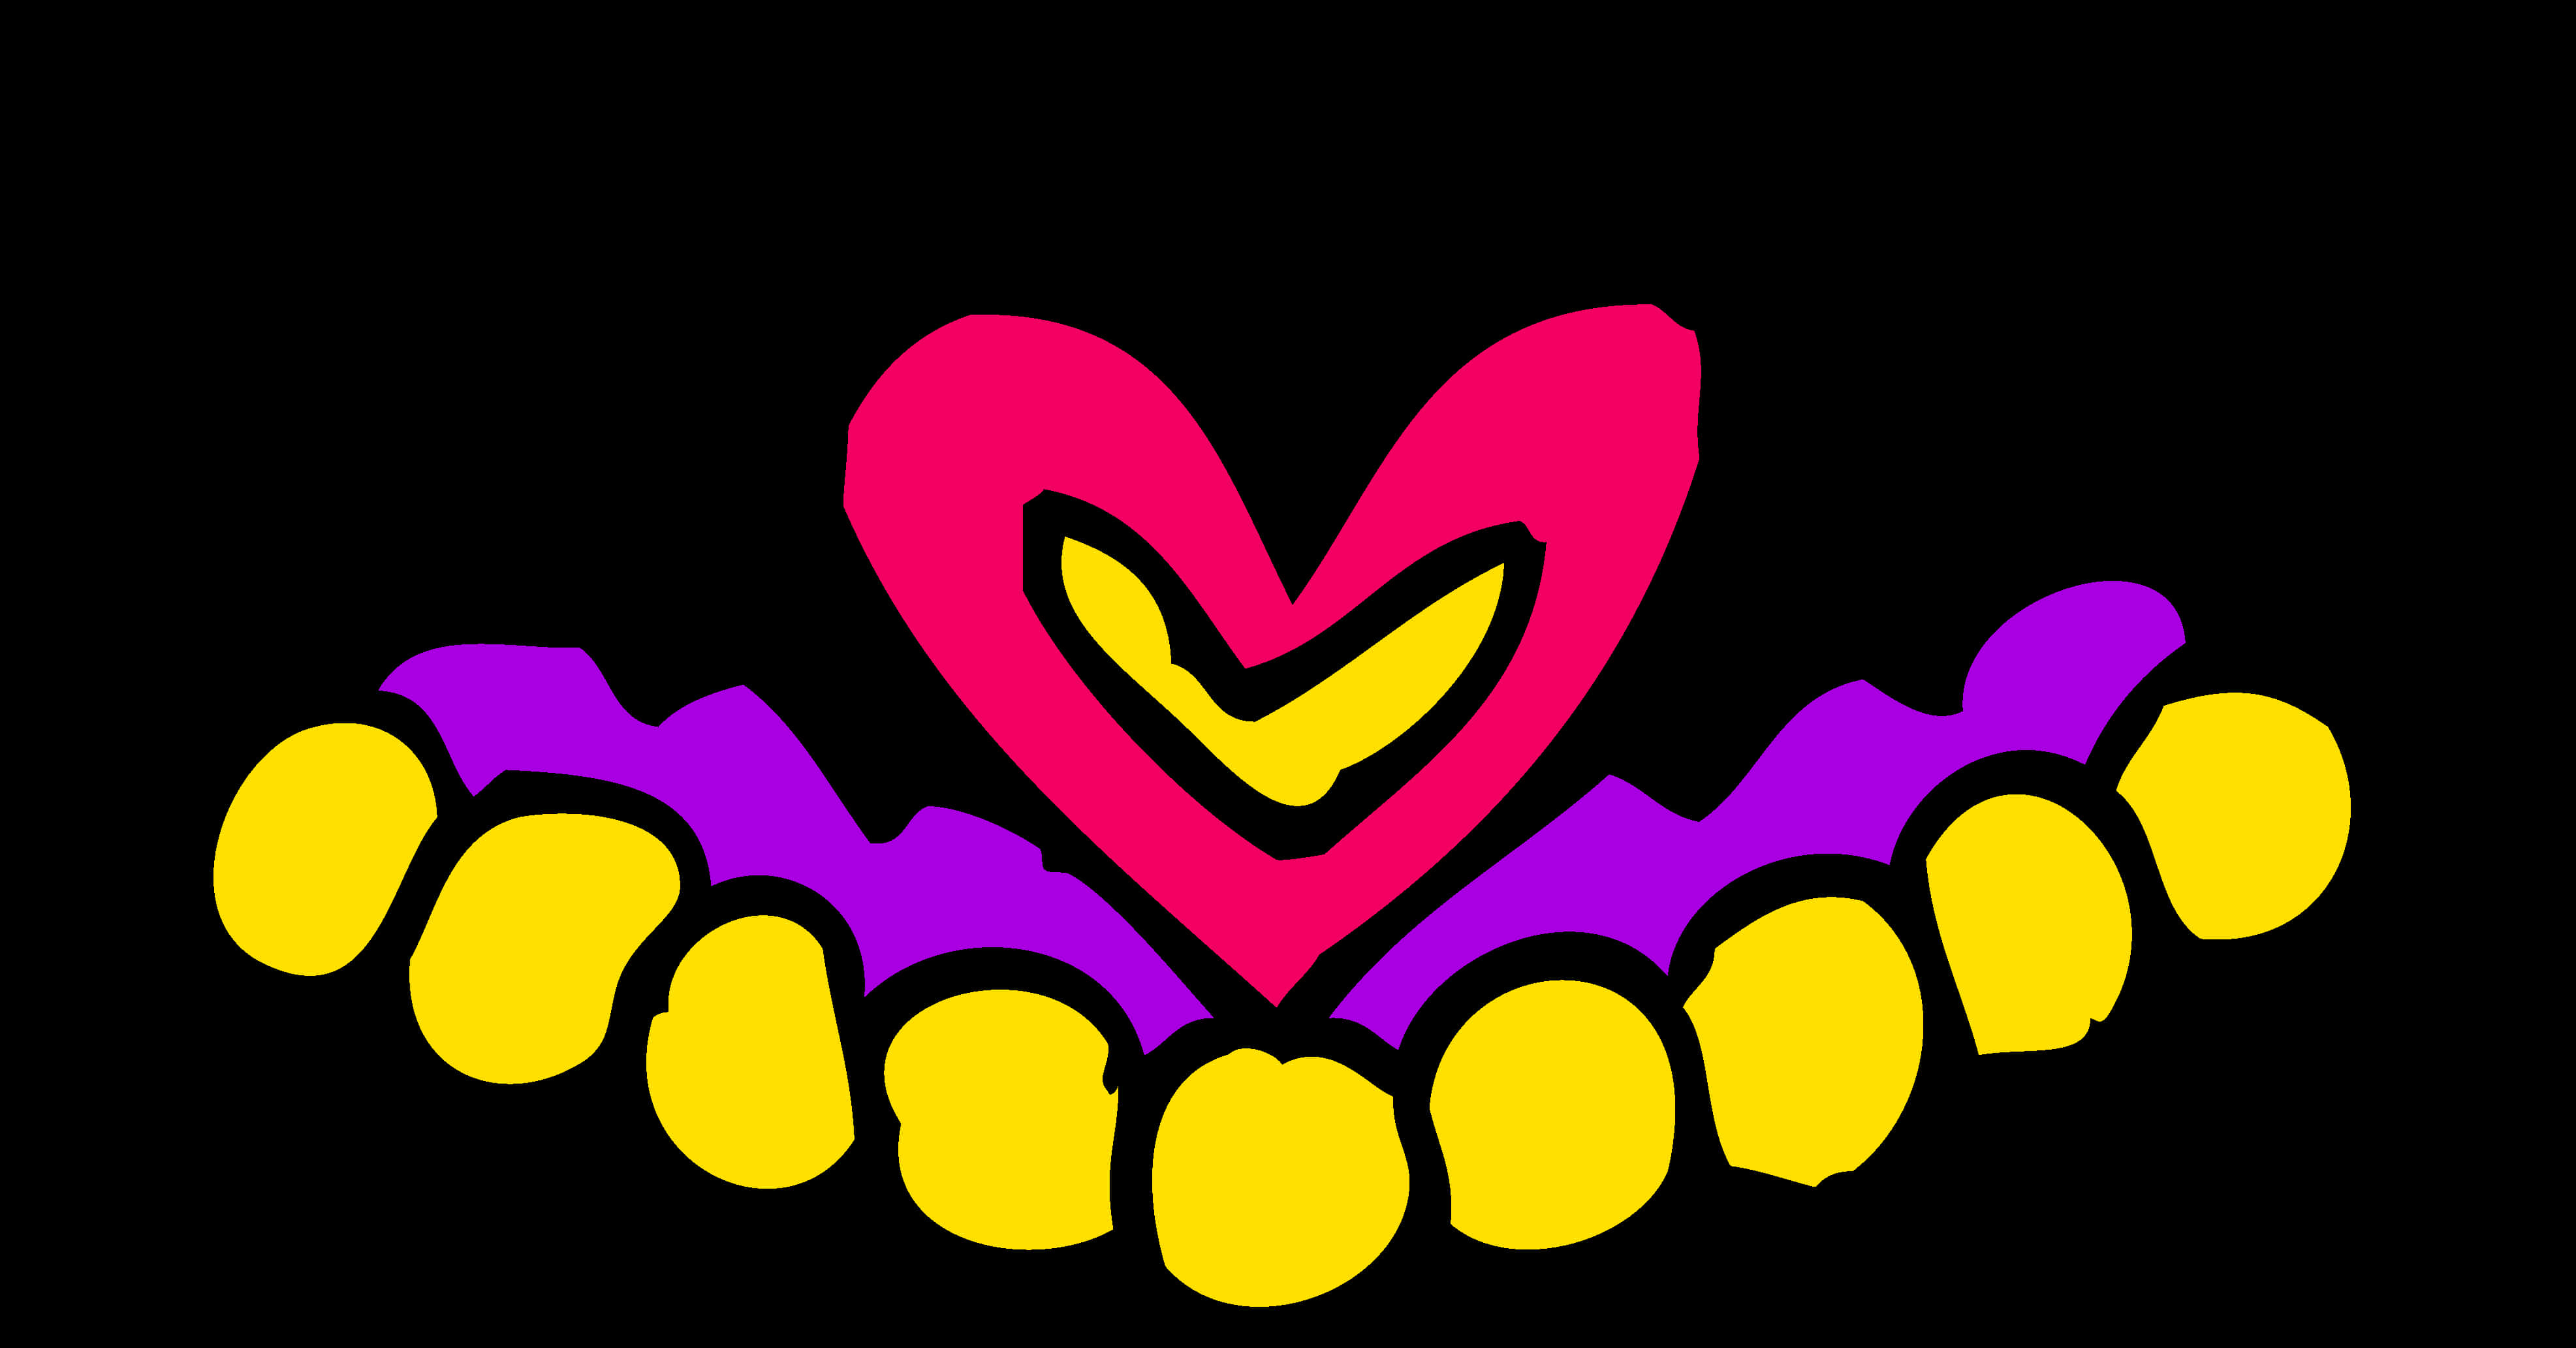 A Heart And Teeth Drawn In Yellow And Purple